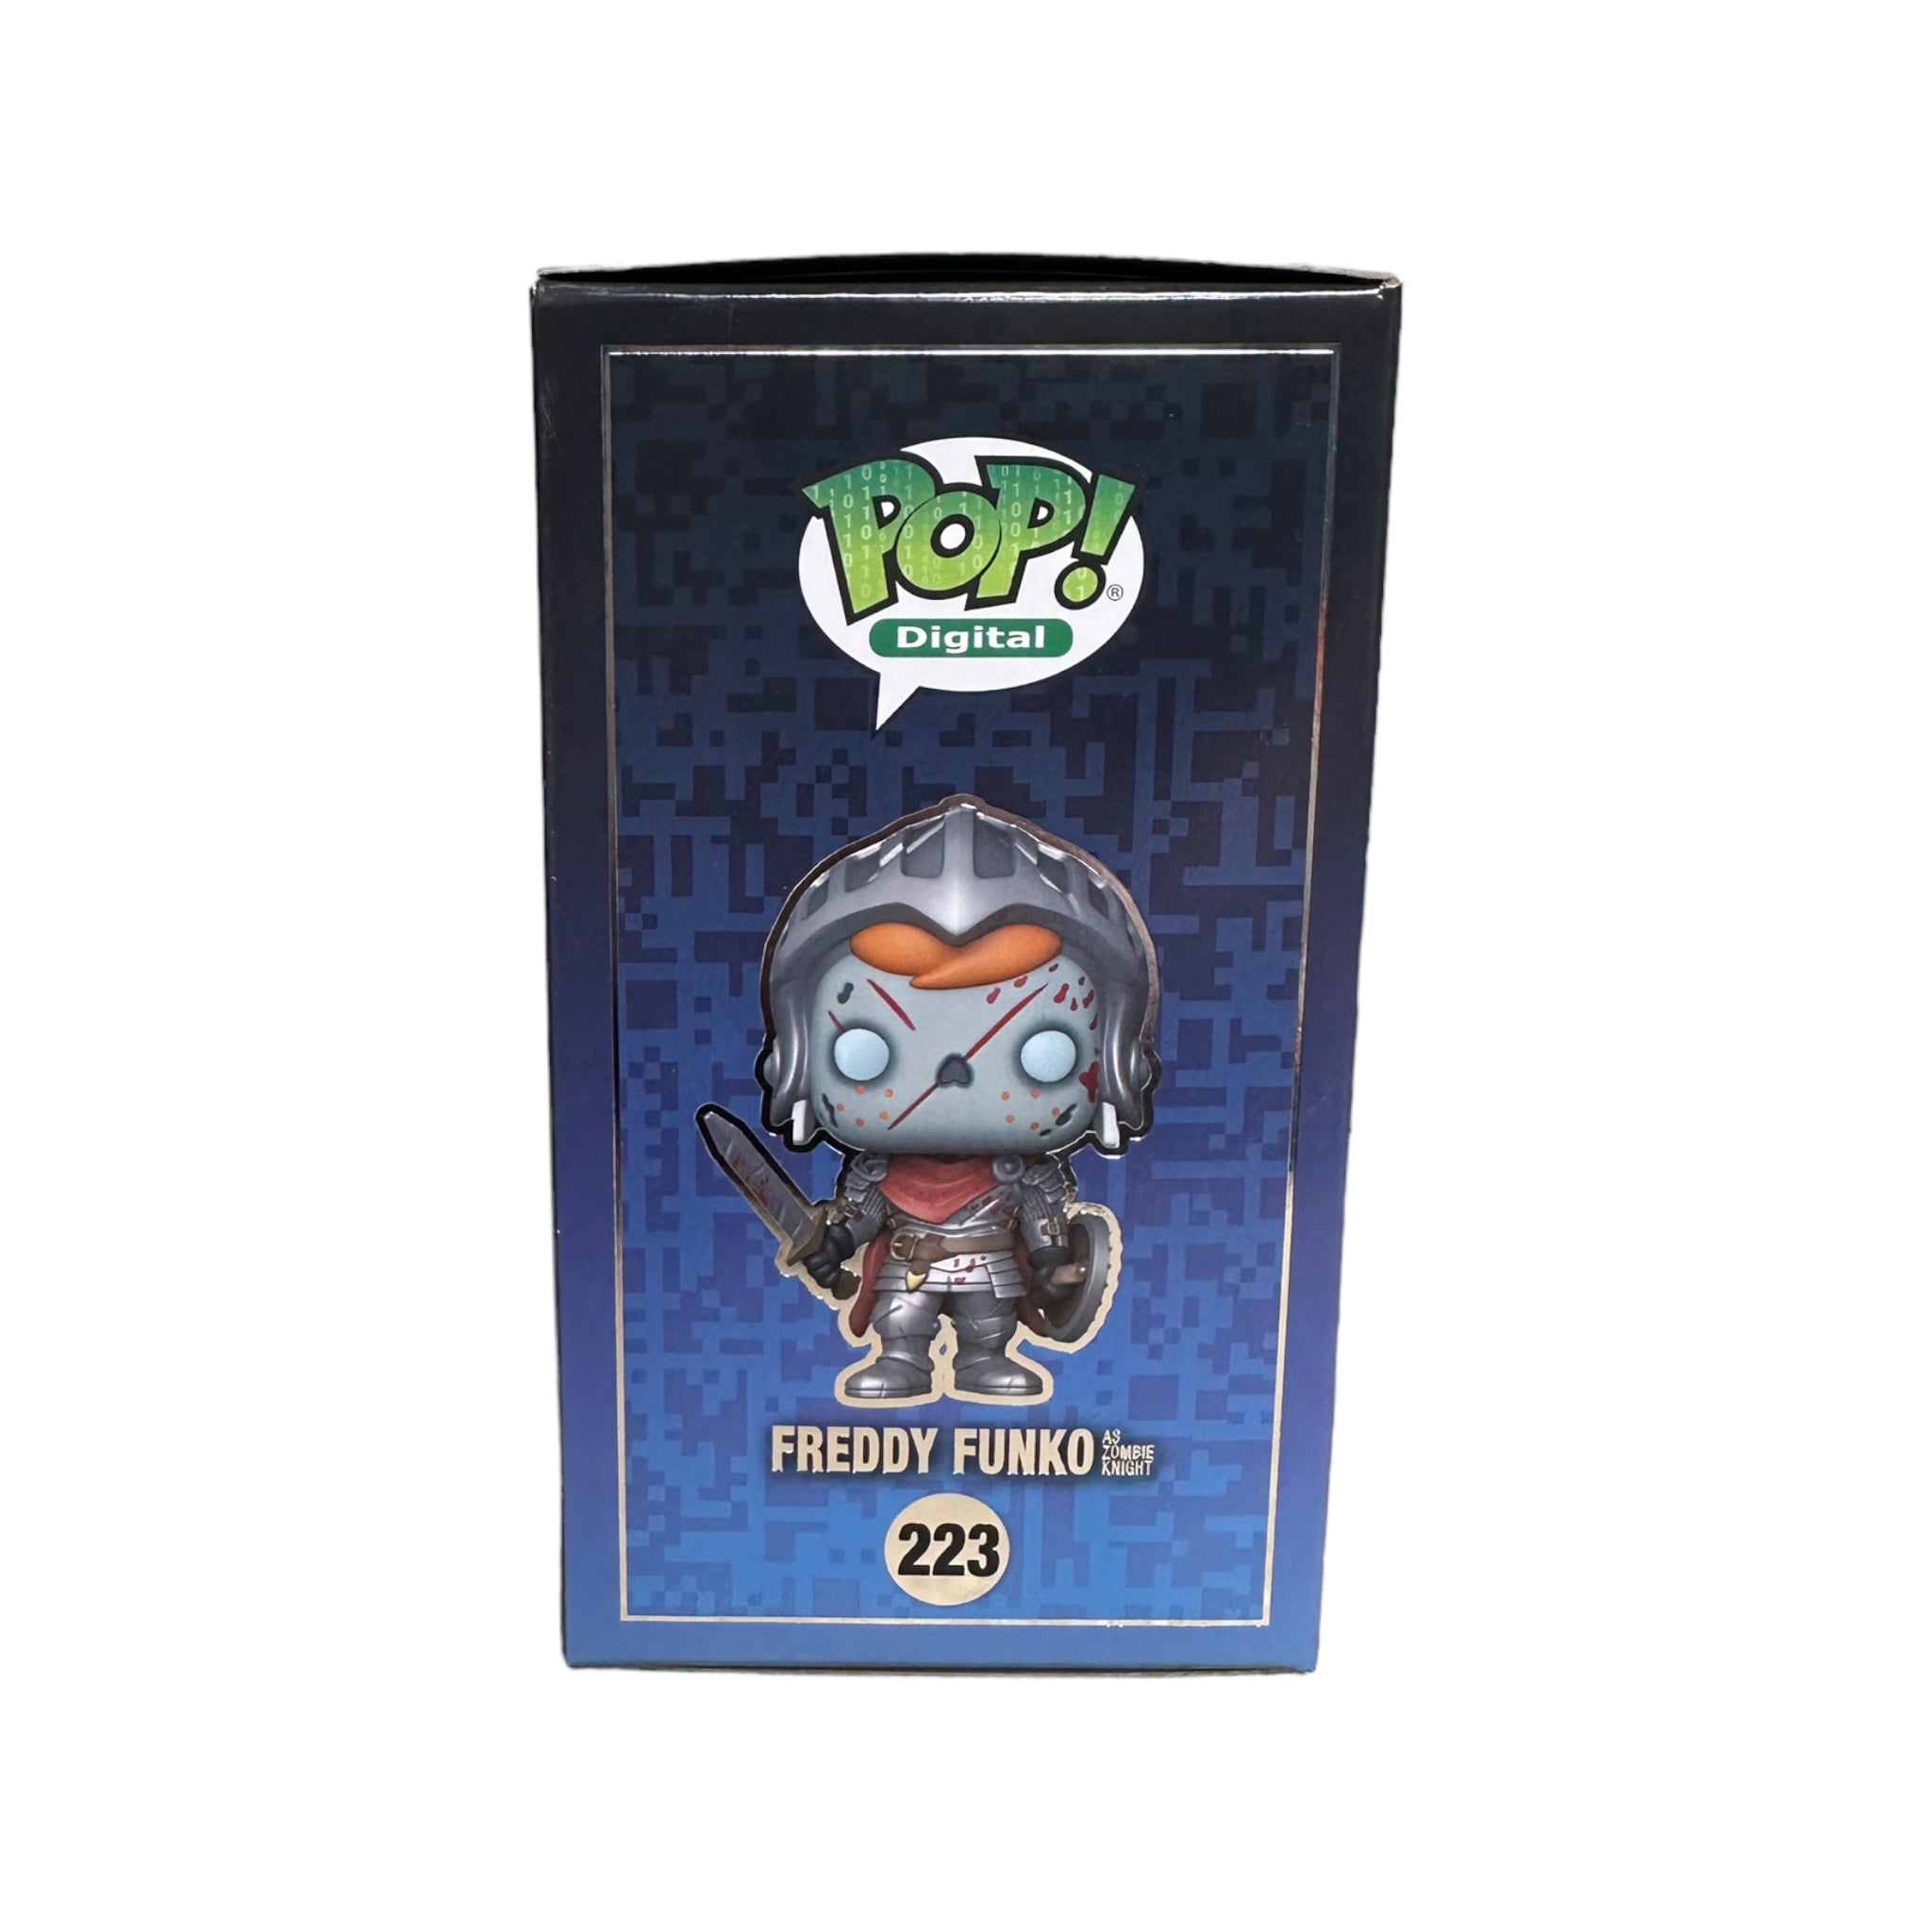 Freddy Funko as Zombie Knight #223 (Glows in the Dark) Funko Pop! - Funkoween Series 1 - NFT Release Exclusive LE1900 Pcs - Condition 9/10